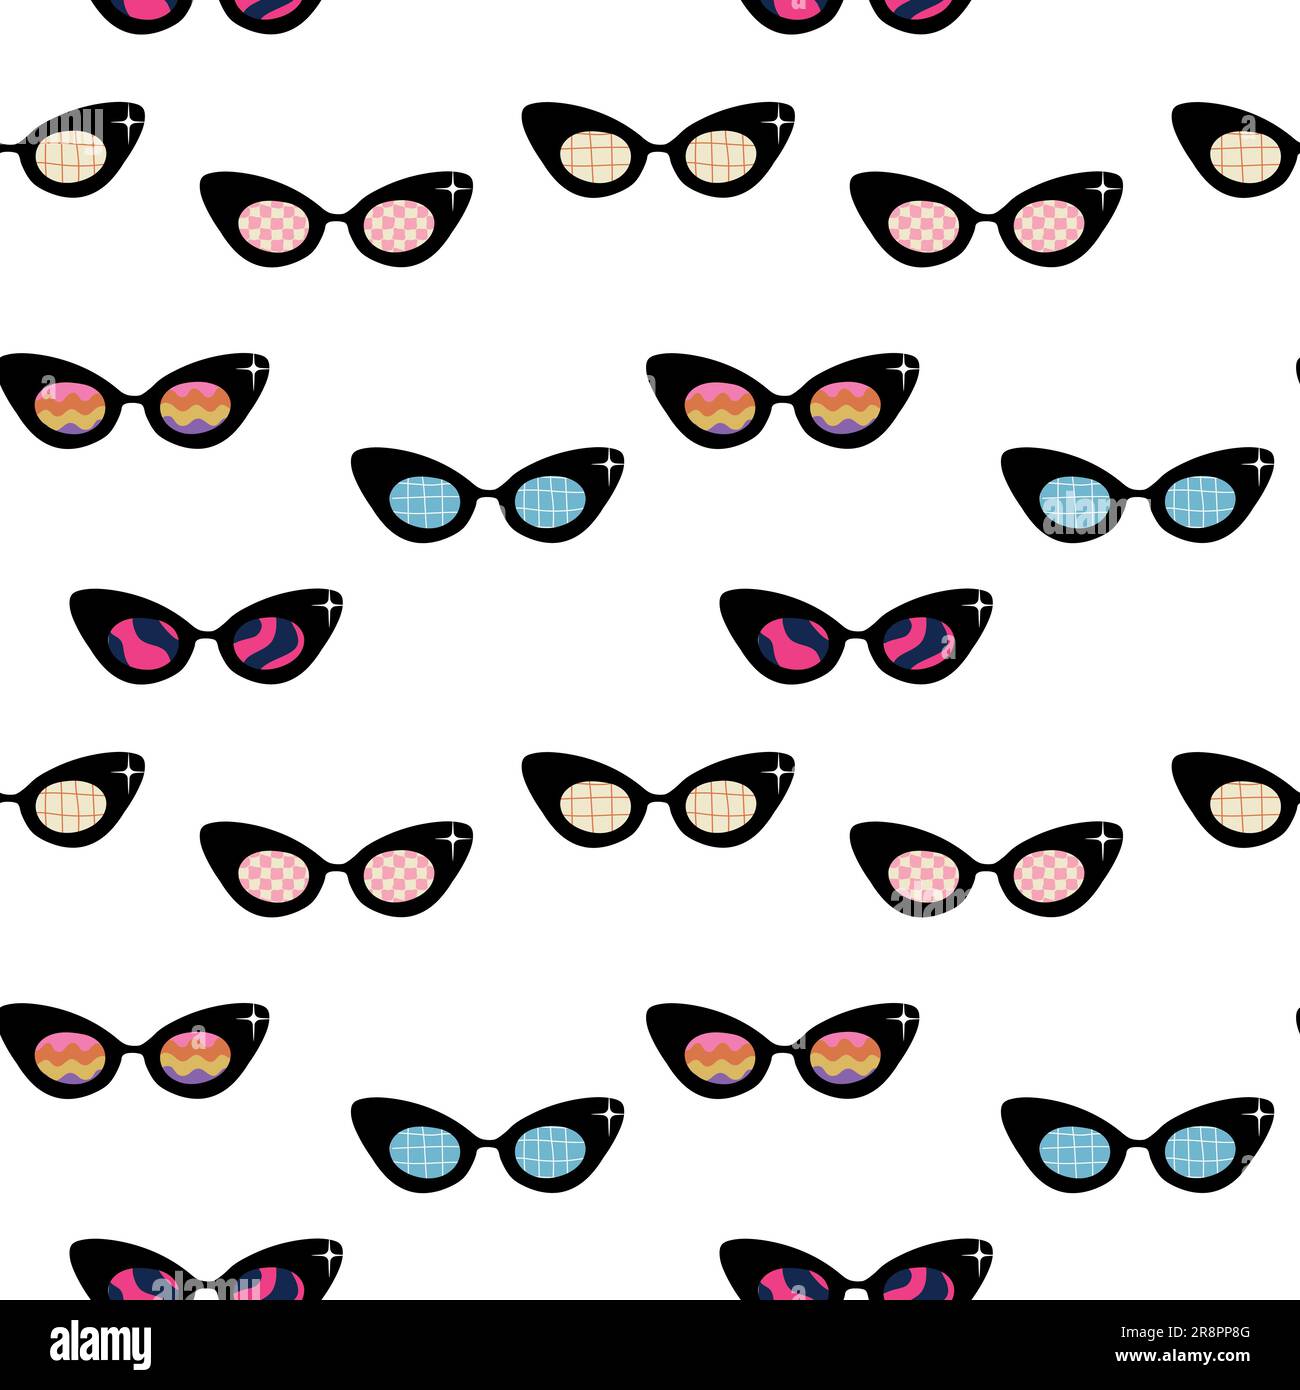 Seamless pattern with psychedelic sunglasses in style of 1970s. Cat form Retro groovy graphic elements of glasses with rainbow, lines and waves. Hippi Stock Vector